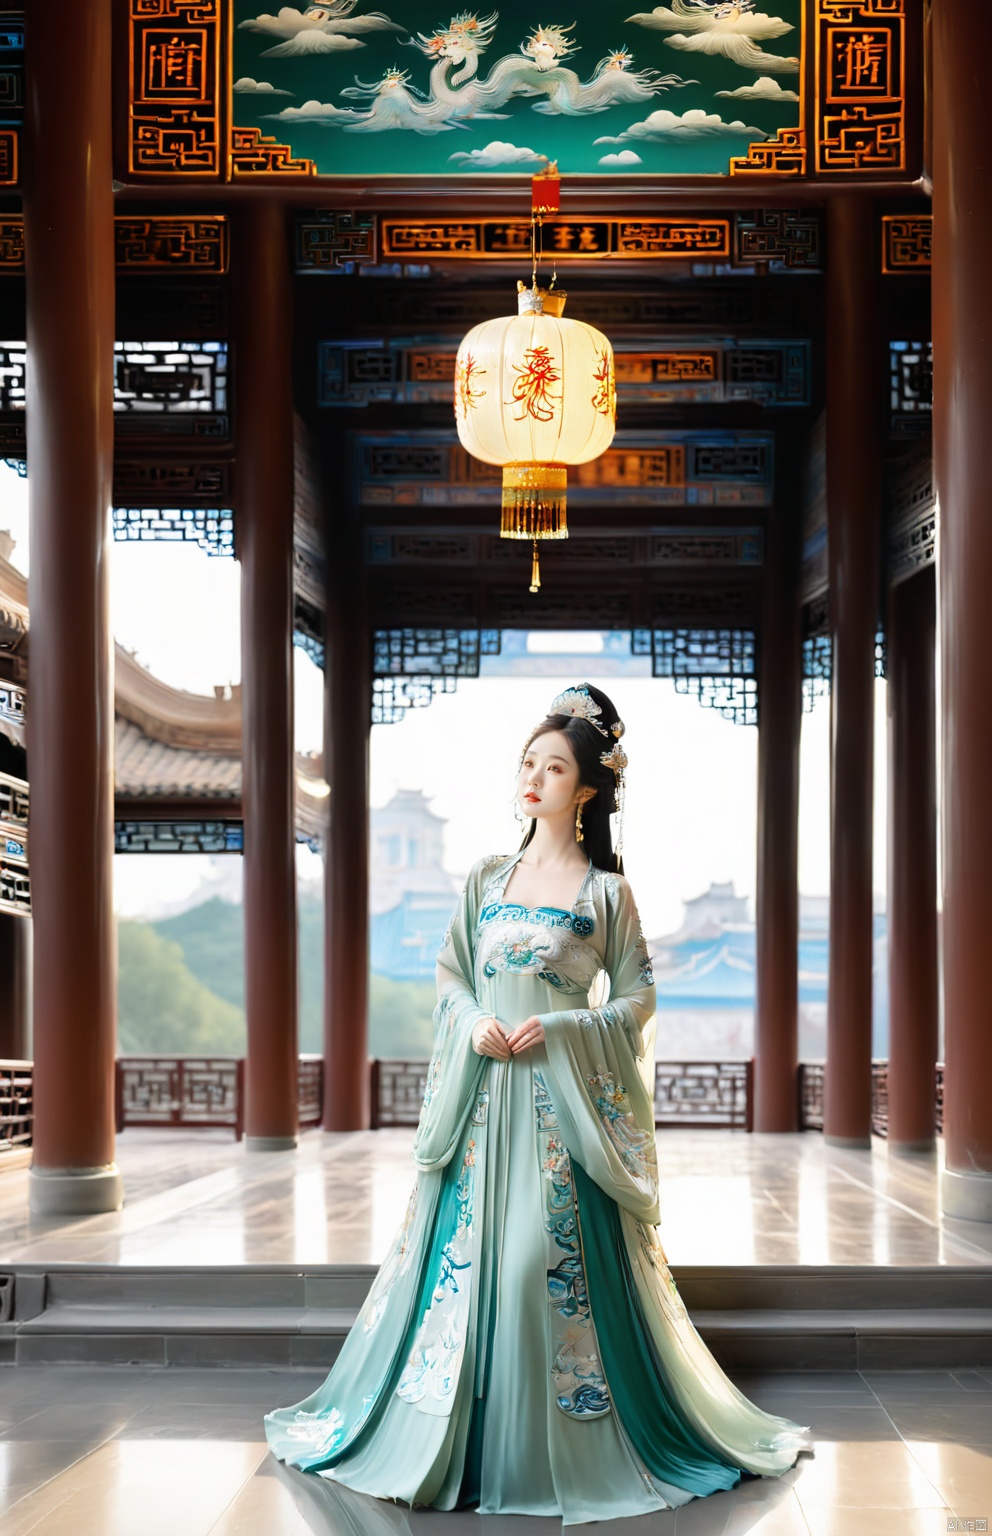 1girl, full body, solo, looking at the audience, long hair, Chinese embroidery princess green dress, Chinese princess, gentle and graceful,
wuman,cloud, sky, cloudy_sky, scenery, arch, pillar, no_humans, architecture,
In this stunning architectural scene, the sky serves as a dramatic canvas painted with an array of clouds that blanket the horizon in a majestic cloudy expanse. The absence of human figures heightens the sense of grandeur and solitude, directing the viewer's focus solely onto the breathtaking scenery below.
A towering edifice rises from the landscape, its form defined by arches and pillars that speak to a rich history and masterful design. The structure seems to reach out towards the heavens, bridging the gap between earth and sky. Each pillar and archway is meticulously crafted, showcasing the intricate details and the timeless beauty of the architecture., g019